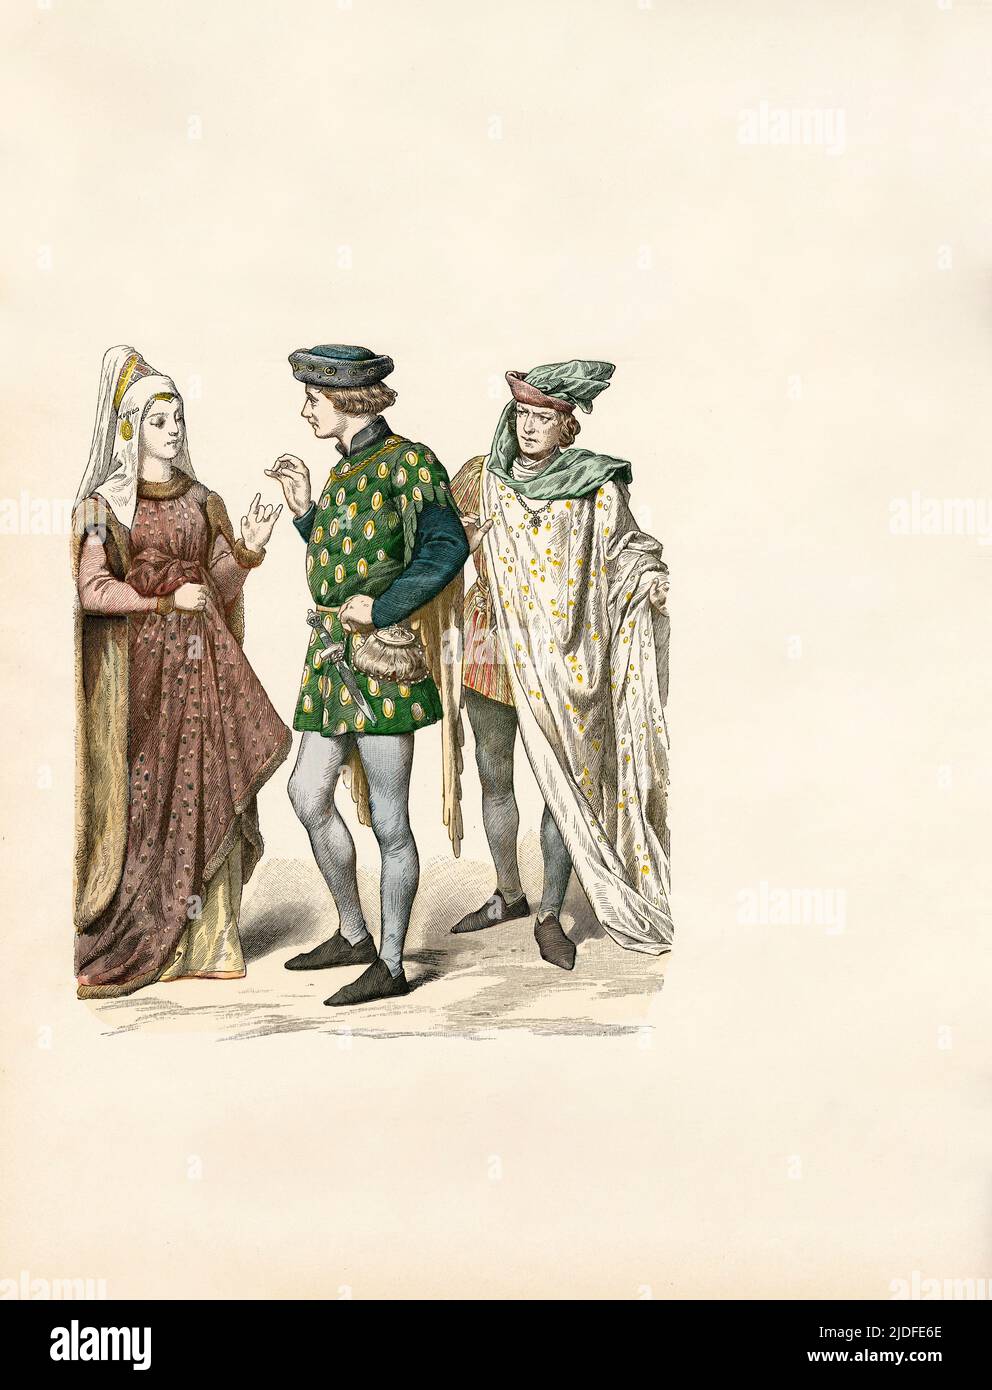 Woman with Two Men, England, 1st Third of 15th Century, Illustration, The History of Costume, Braun & Schneider, Munich, Germany, 1861-1880 Stock Photo